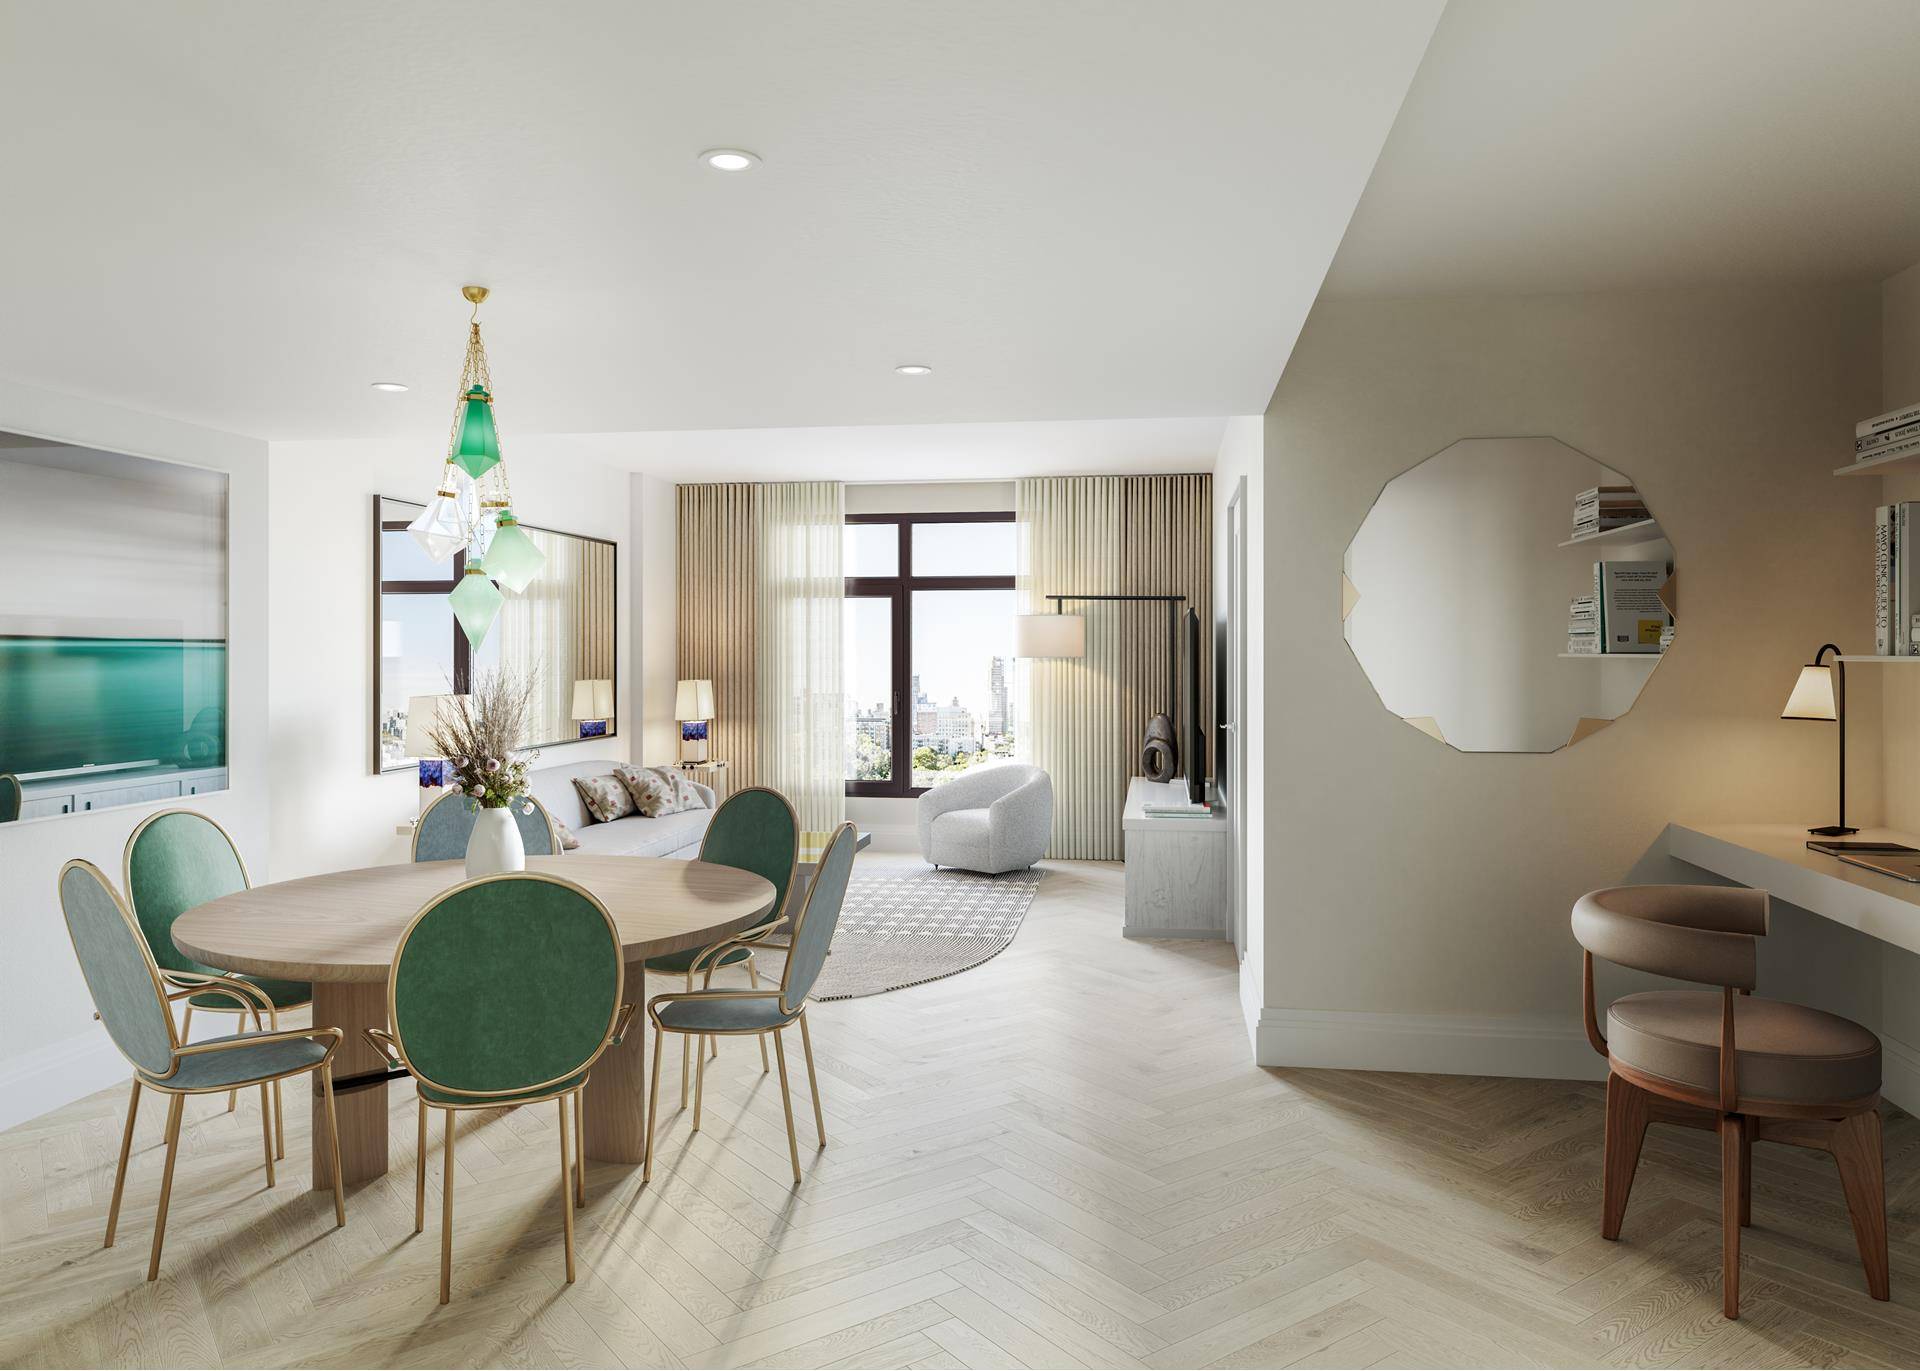 Sales Gallery Now Open By Appointment Introducing residence 5R at 300 West, a northwestern facing studio offering an open concept living area that boasts custom White Oak herringbone flooring, central ...